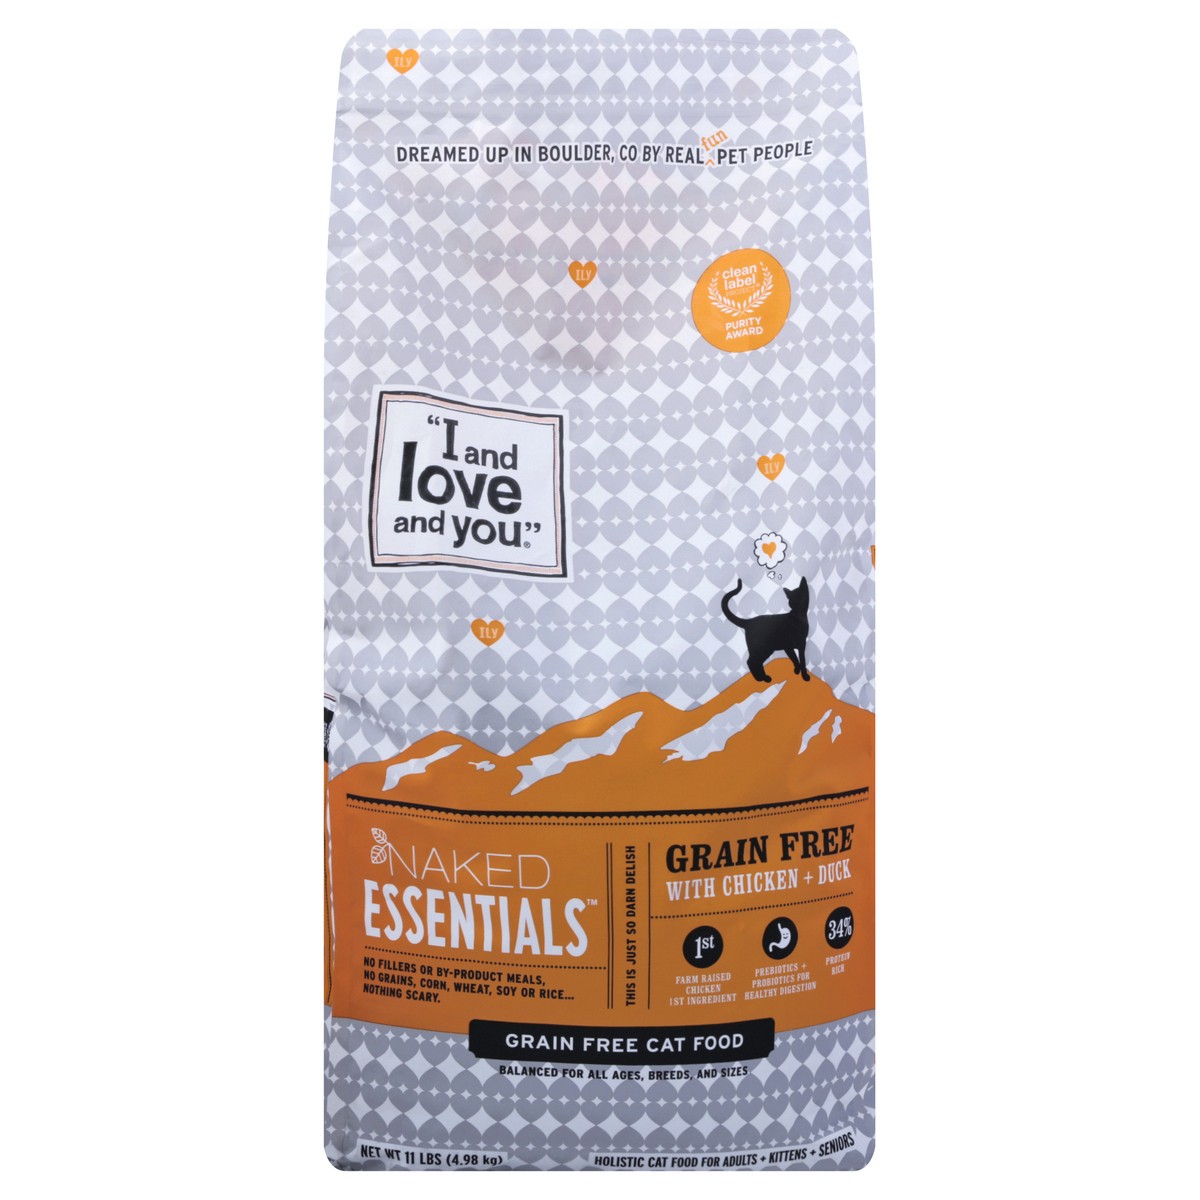 slide 1 of 29, I and Love and You Naked Essentials Gran Free With Chicken + Duck Cat Food 11 lb, 11 lb